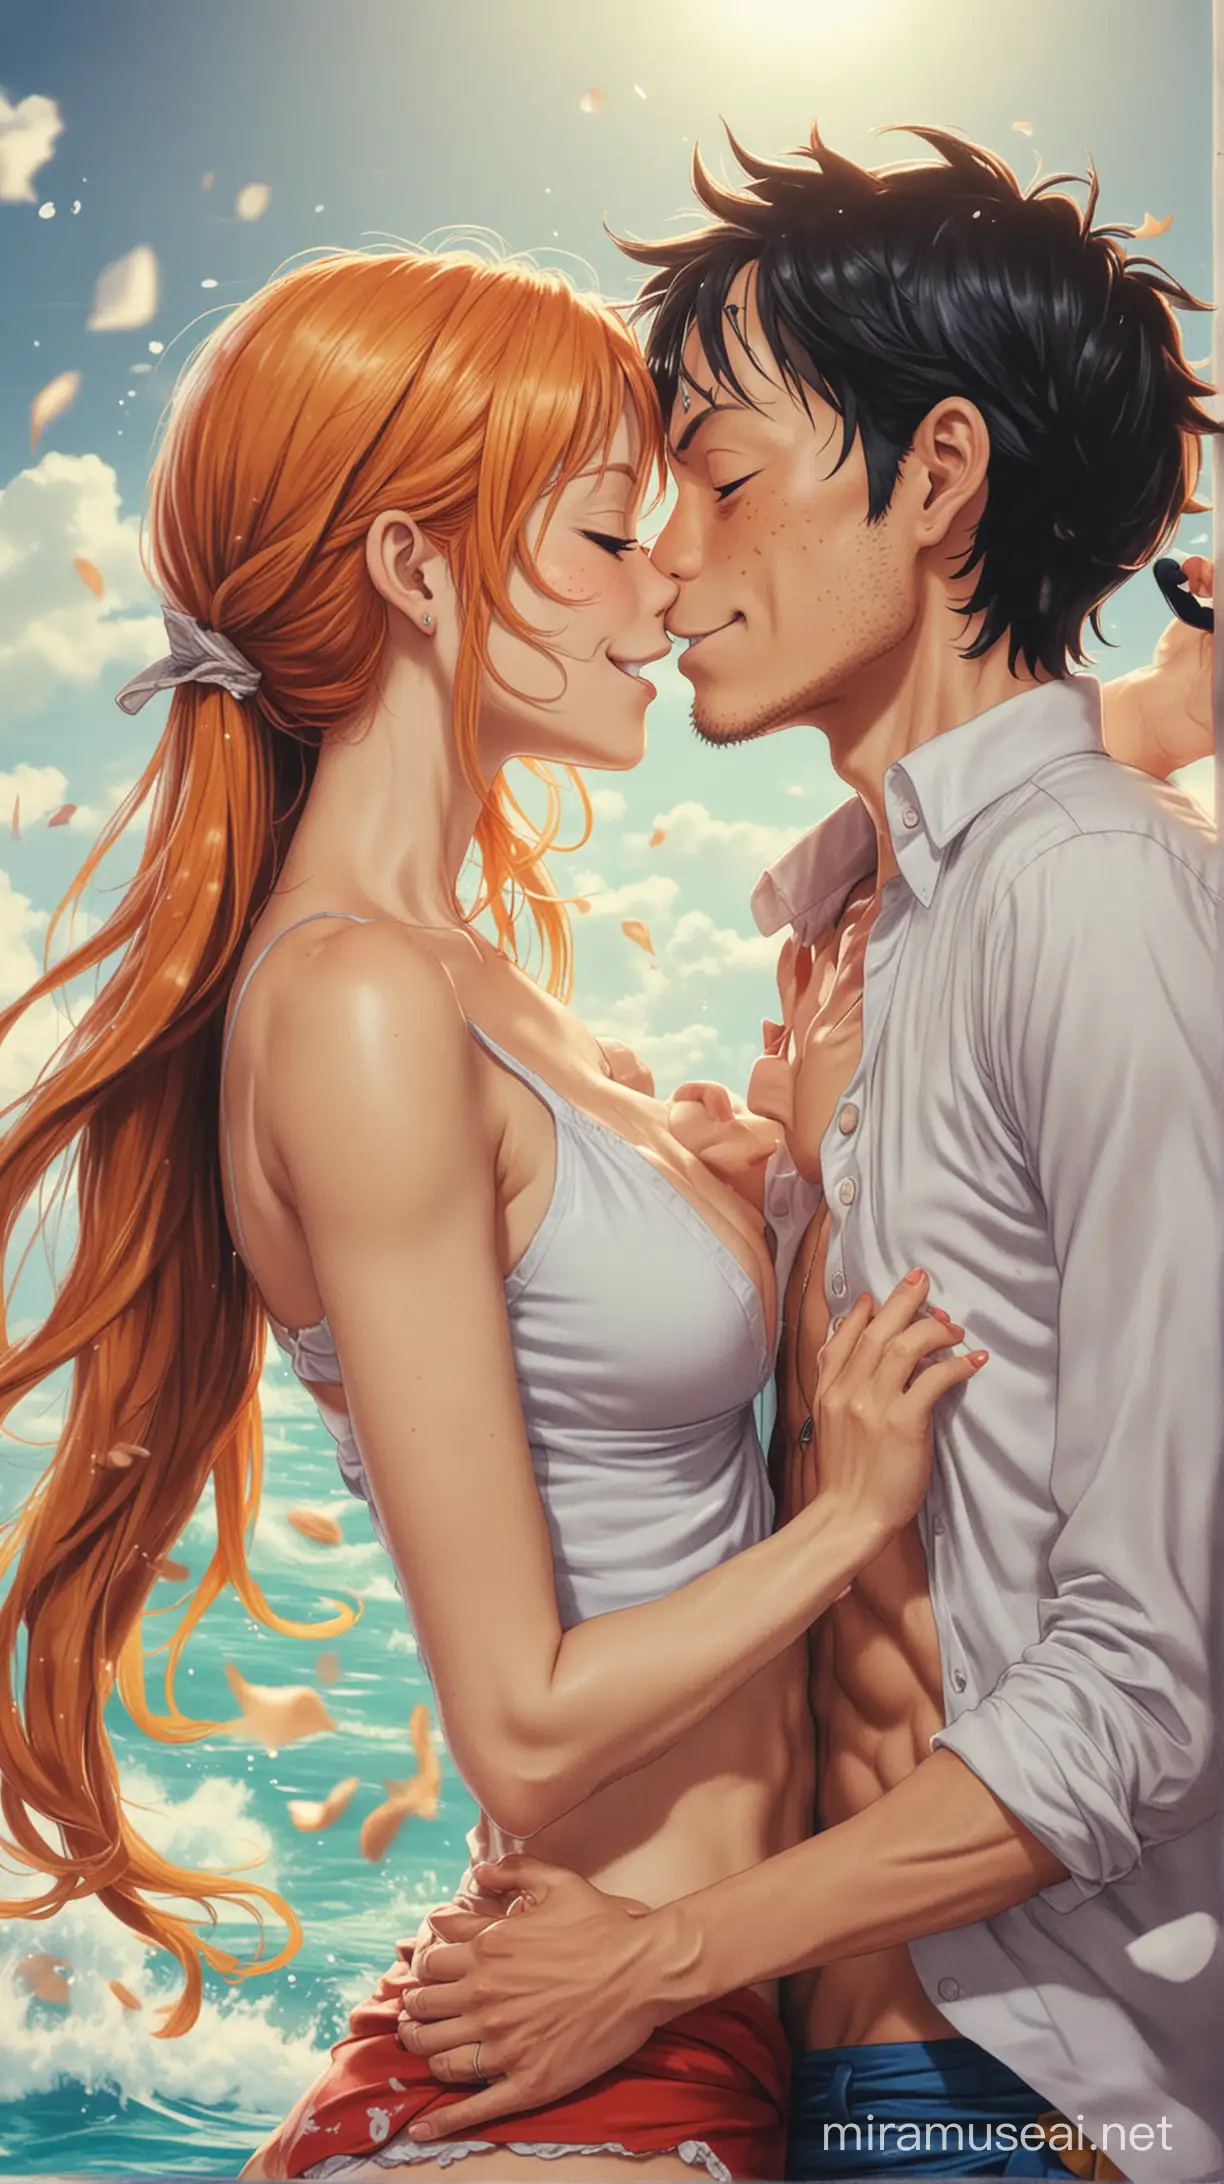 Luffy Kisses Nami in a Romantic Moment